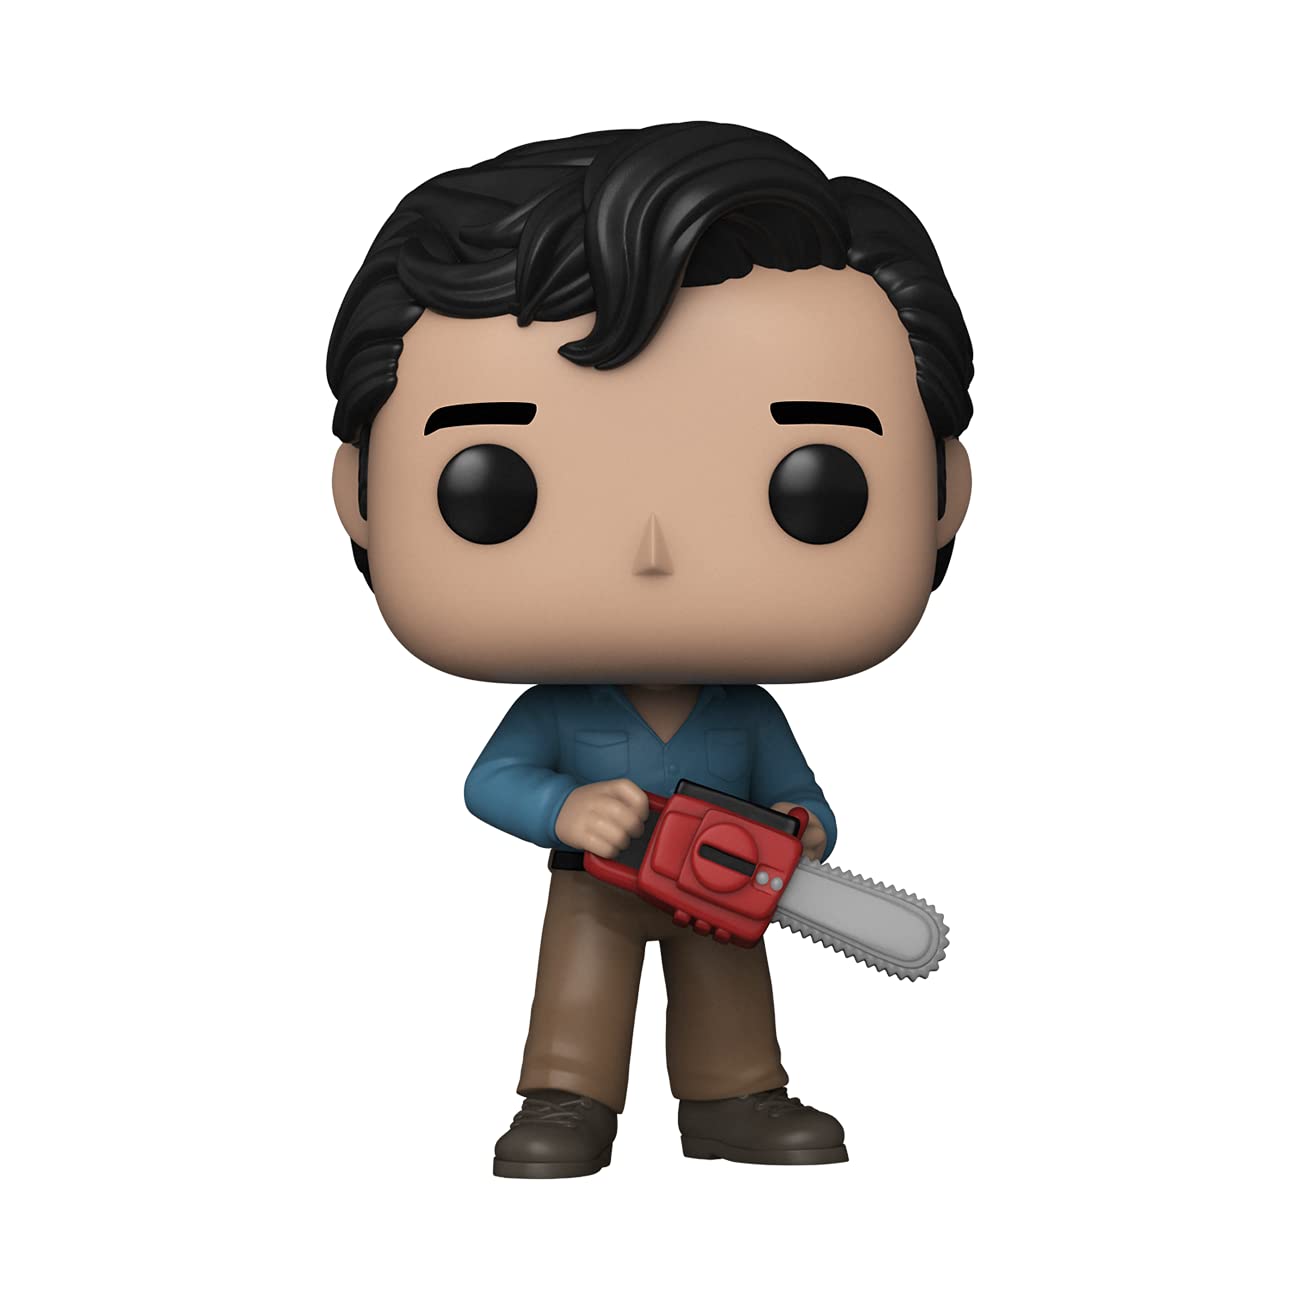 Funko POP! Movies: Evil Dead Anniversary - Ash #1142 (Styles May Vary) 3.75 inches